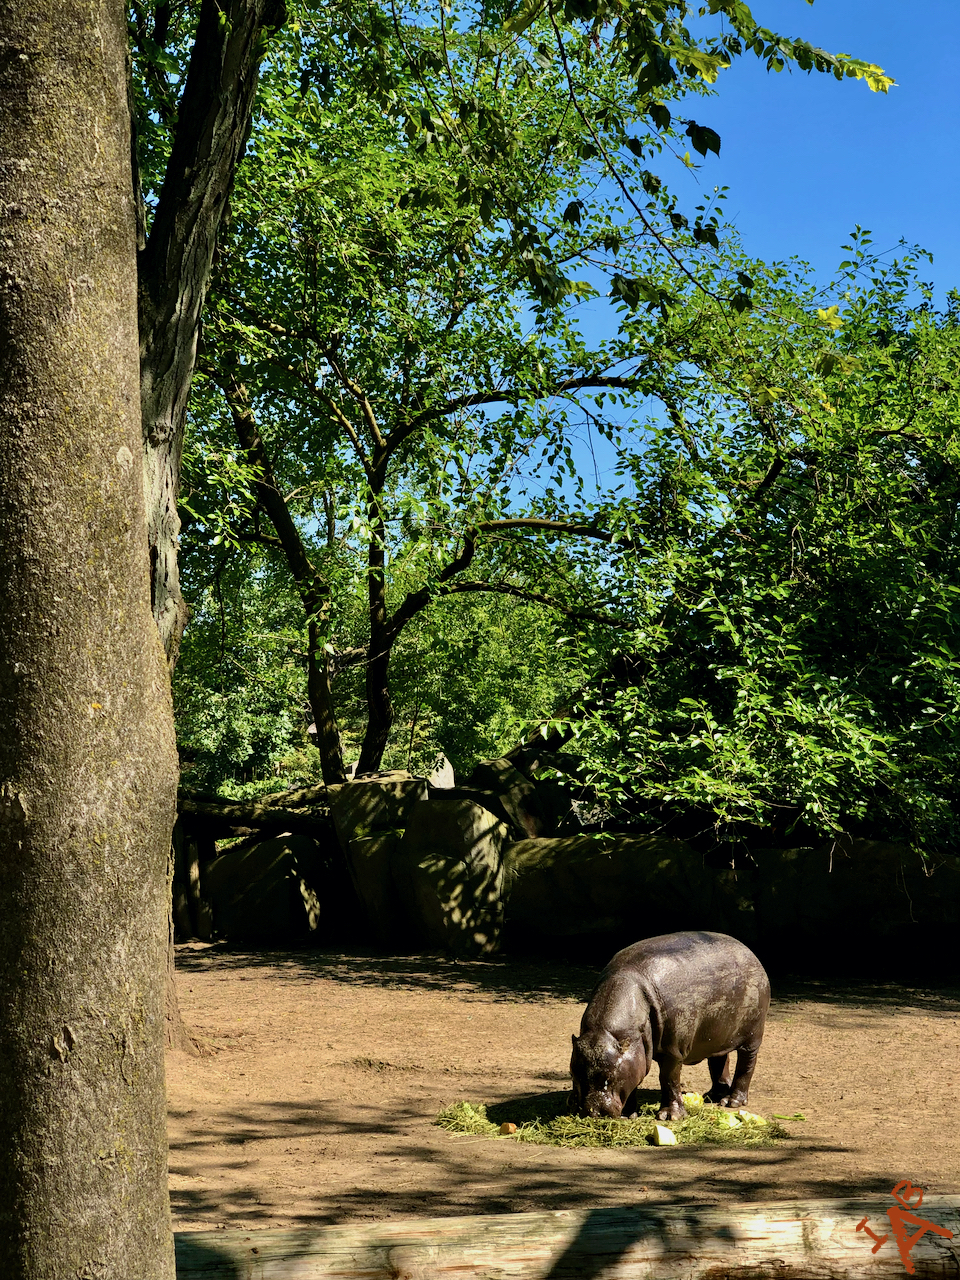 A hippo at a zoo stops for some grazing.